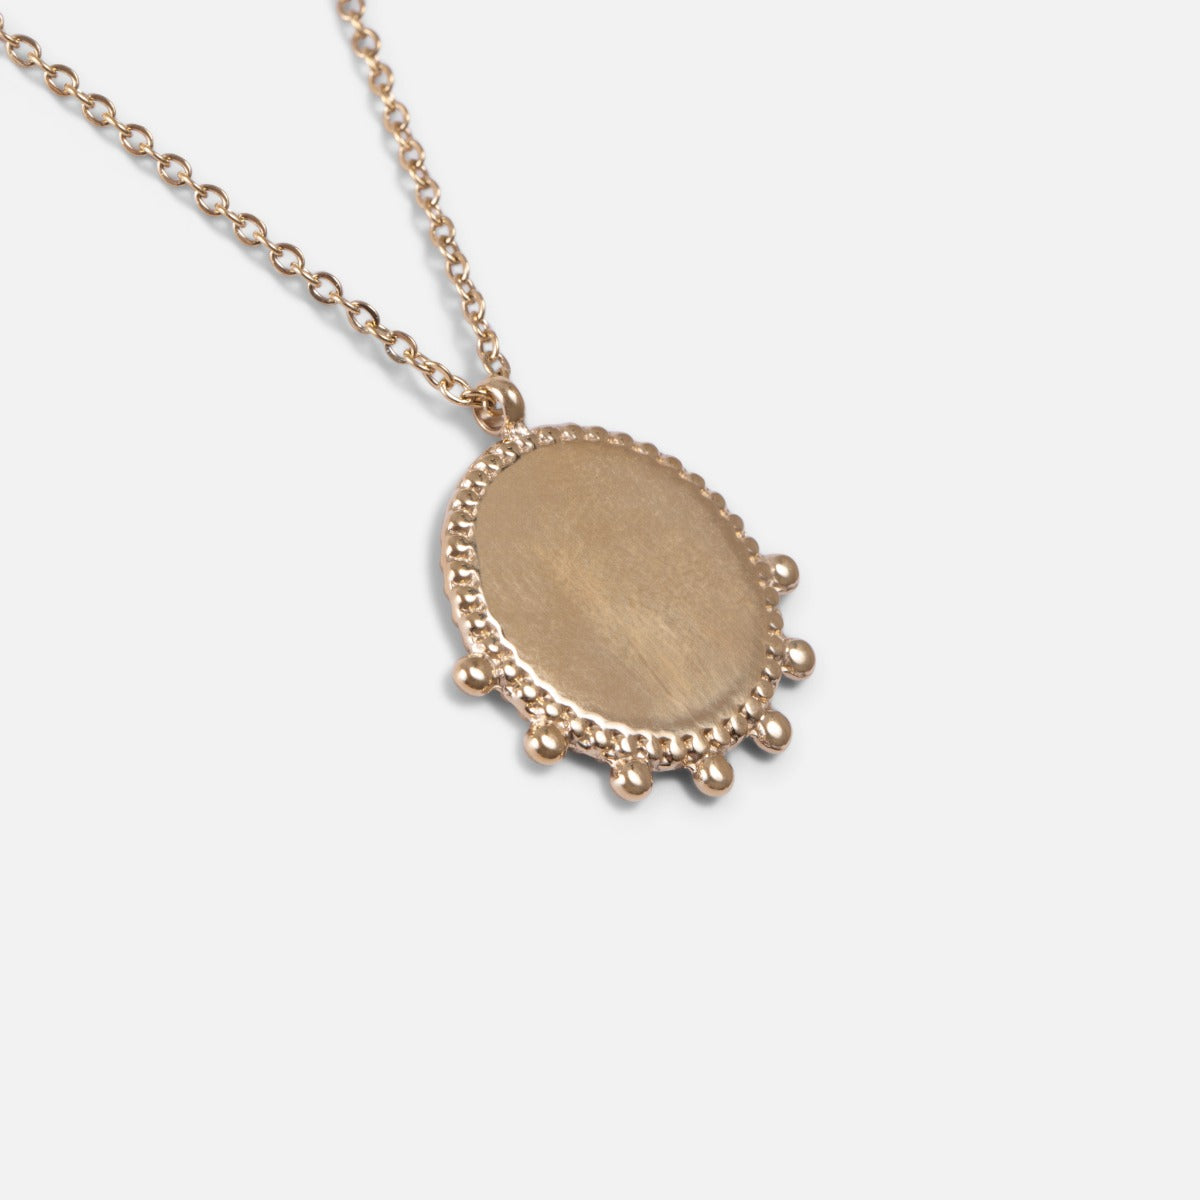 Golden stainless steel necklace with original circular medallion